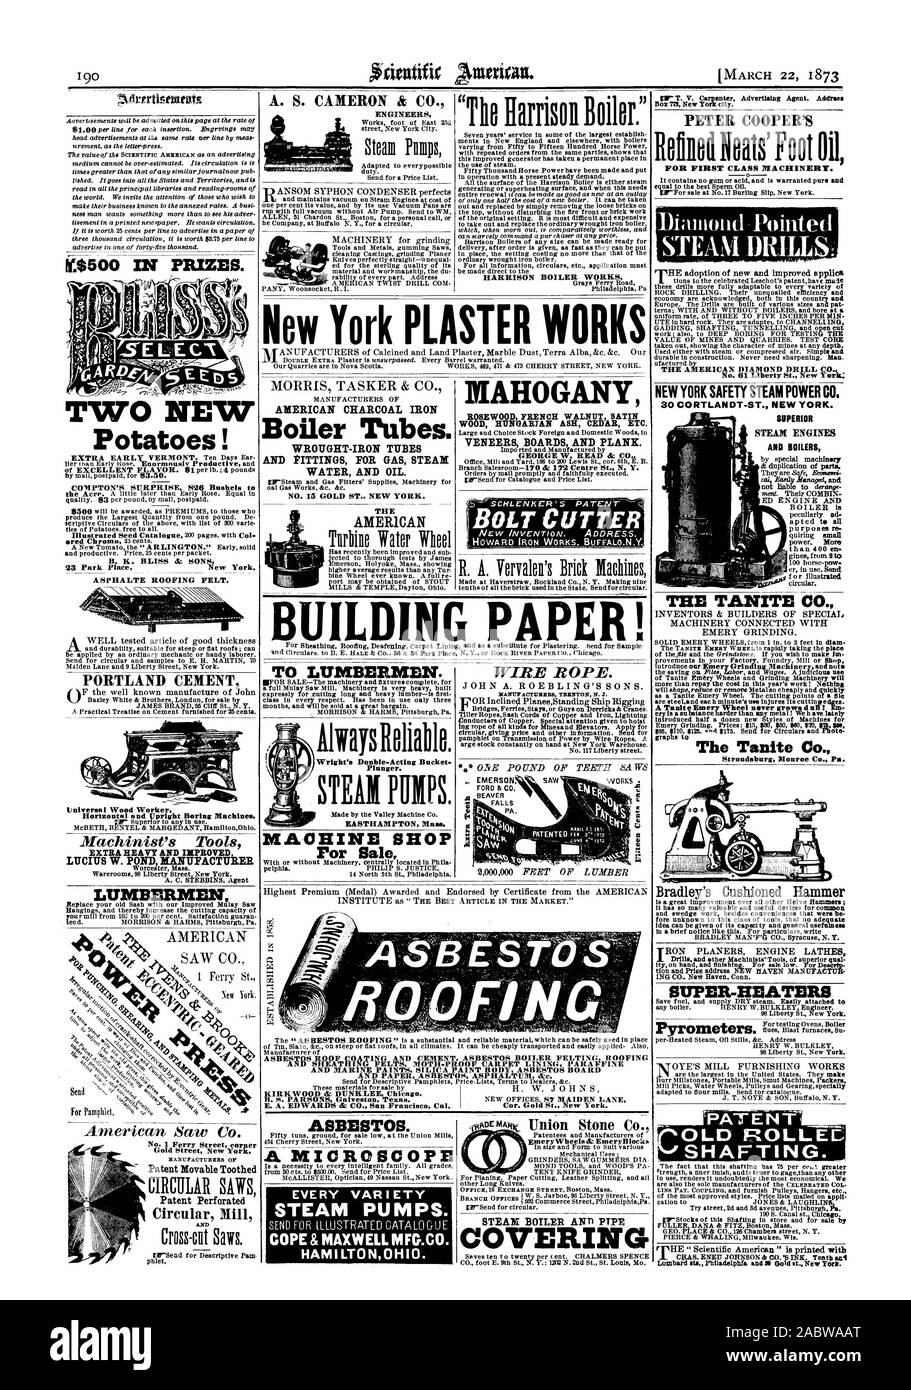 The Harrison Boiler.' NI$500 IN PRIZES. TWO NEW Potatoes! COMPTON'S SURPRISE 826 Bushels t B. K. BLISS & SONS 23 Park Place New York. A SPHALTE ROOFING FELT. PORTLAND CEMENT Universal Wood Worker Horizontaland Upright Boring Machines. EXTRA HEAVY AND IMPROVED. LUCIUS W. POND MANUFACTURER TO LUMBERMEN. EASTHAMPTON Mass. MACHINE SHOP For Sale HARRISON BOILER WORKS PETER COOPER'S Refilled Neat' Foot Oil FOR FIRST CLASS MACHINERY. Diamond Pointed STEAM DRILLS: Stroudsburg Monroe Co. Pa. A. S. CAMERON & C ENGINEERS WIRE ROPE. MANUFACTURERS TRENTON N. X. EMERSON SAW THE AMERICAN DIAMOND DRILL CO Stock Photo